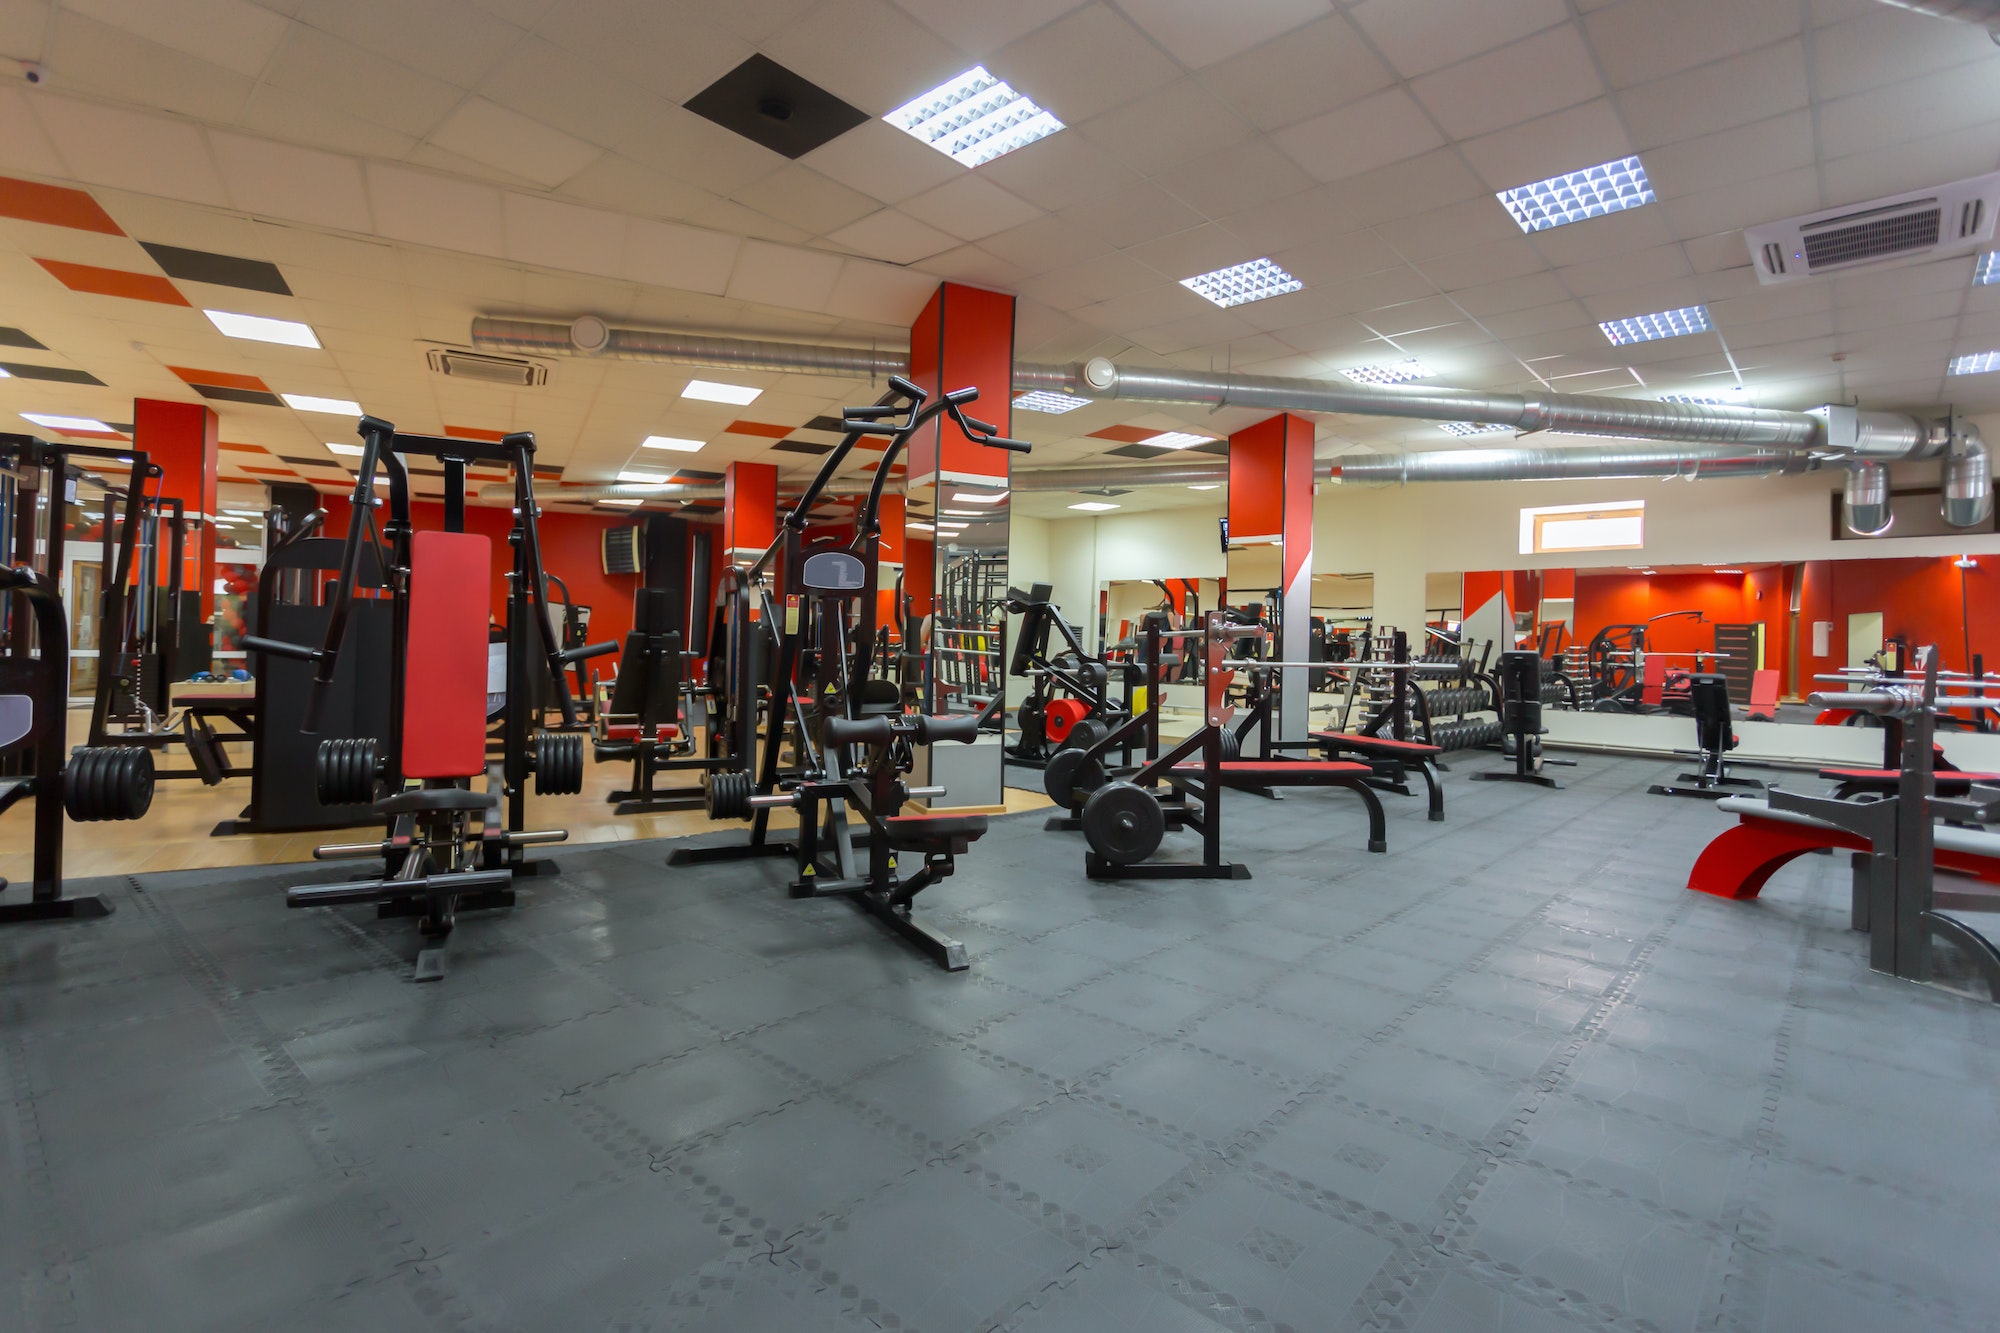 Equipments in the gym